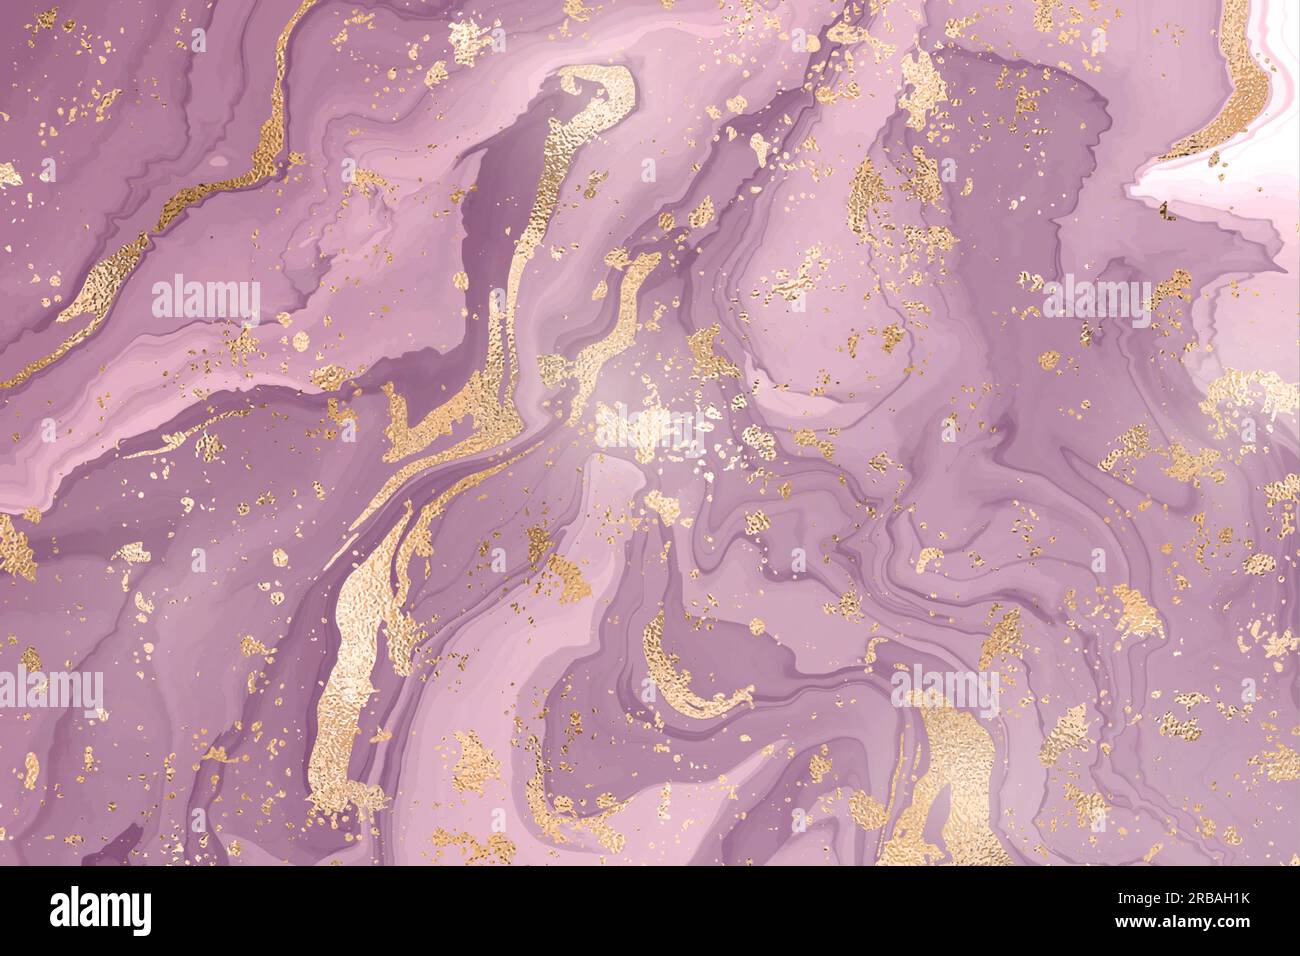 Abstract dusty violet liquid marble or watercolor background with